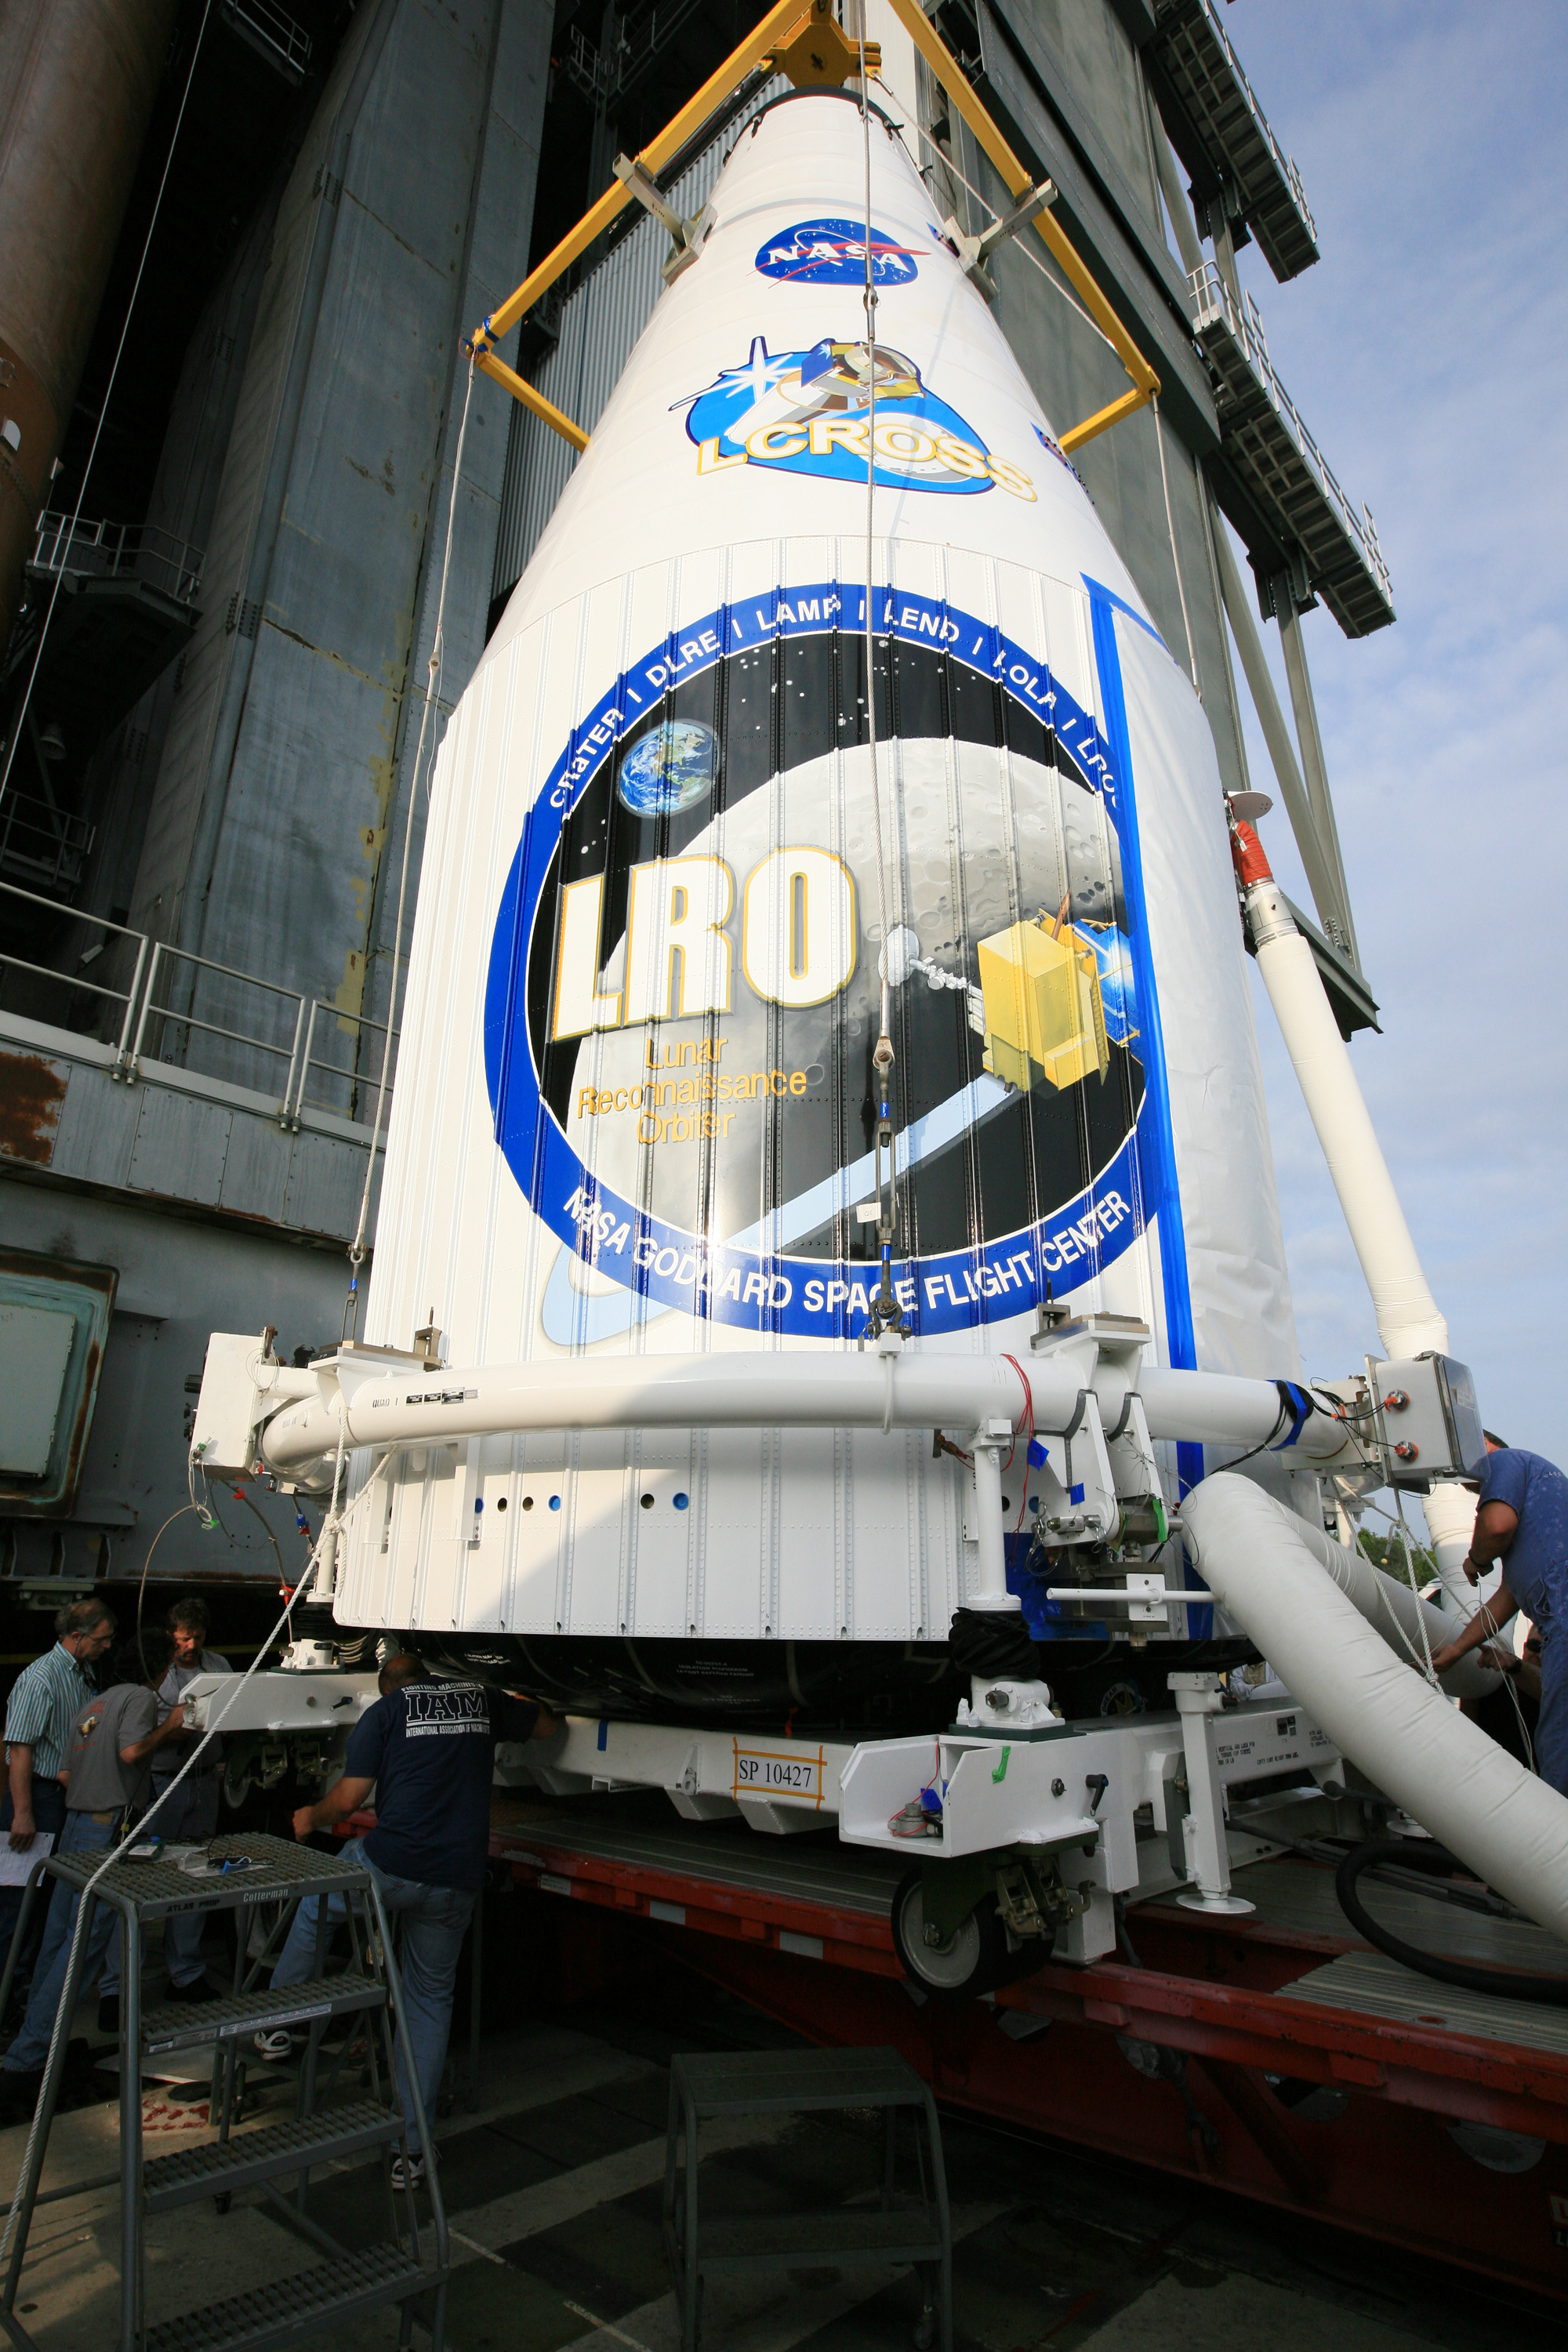 Unmated LRO/LCROSS at Cape Canaveral Air Force Station; from NASA